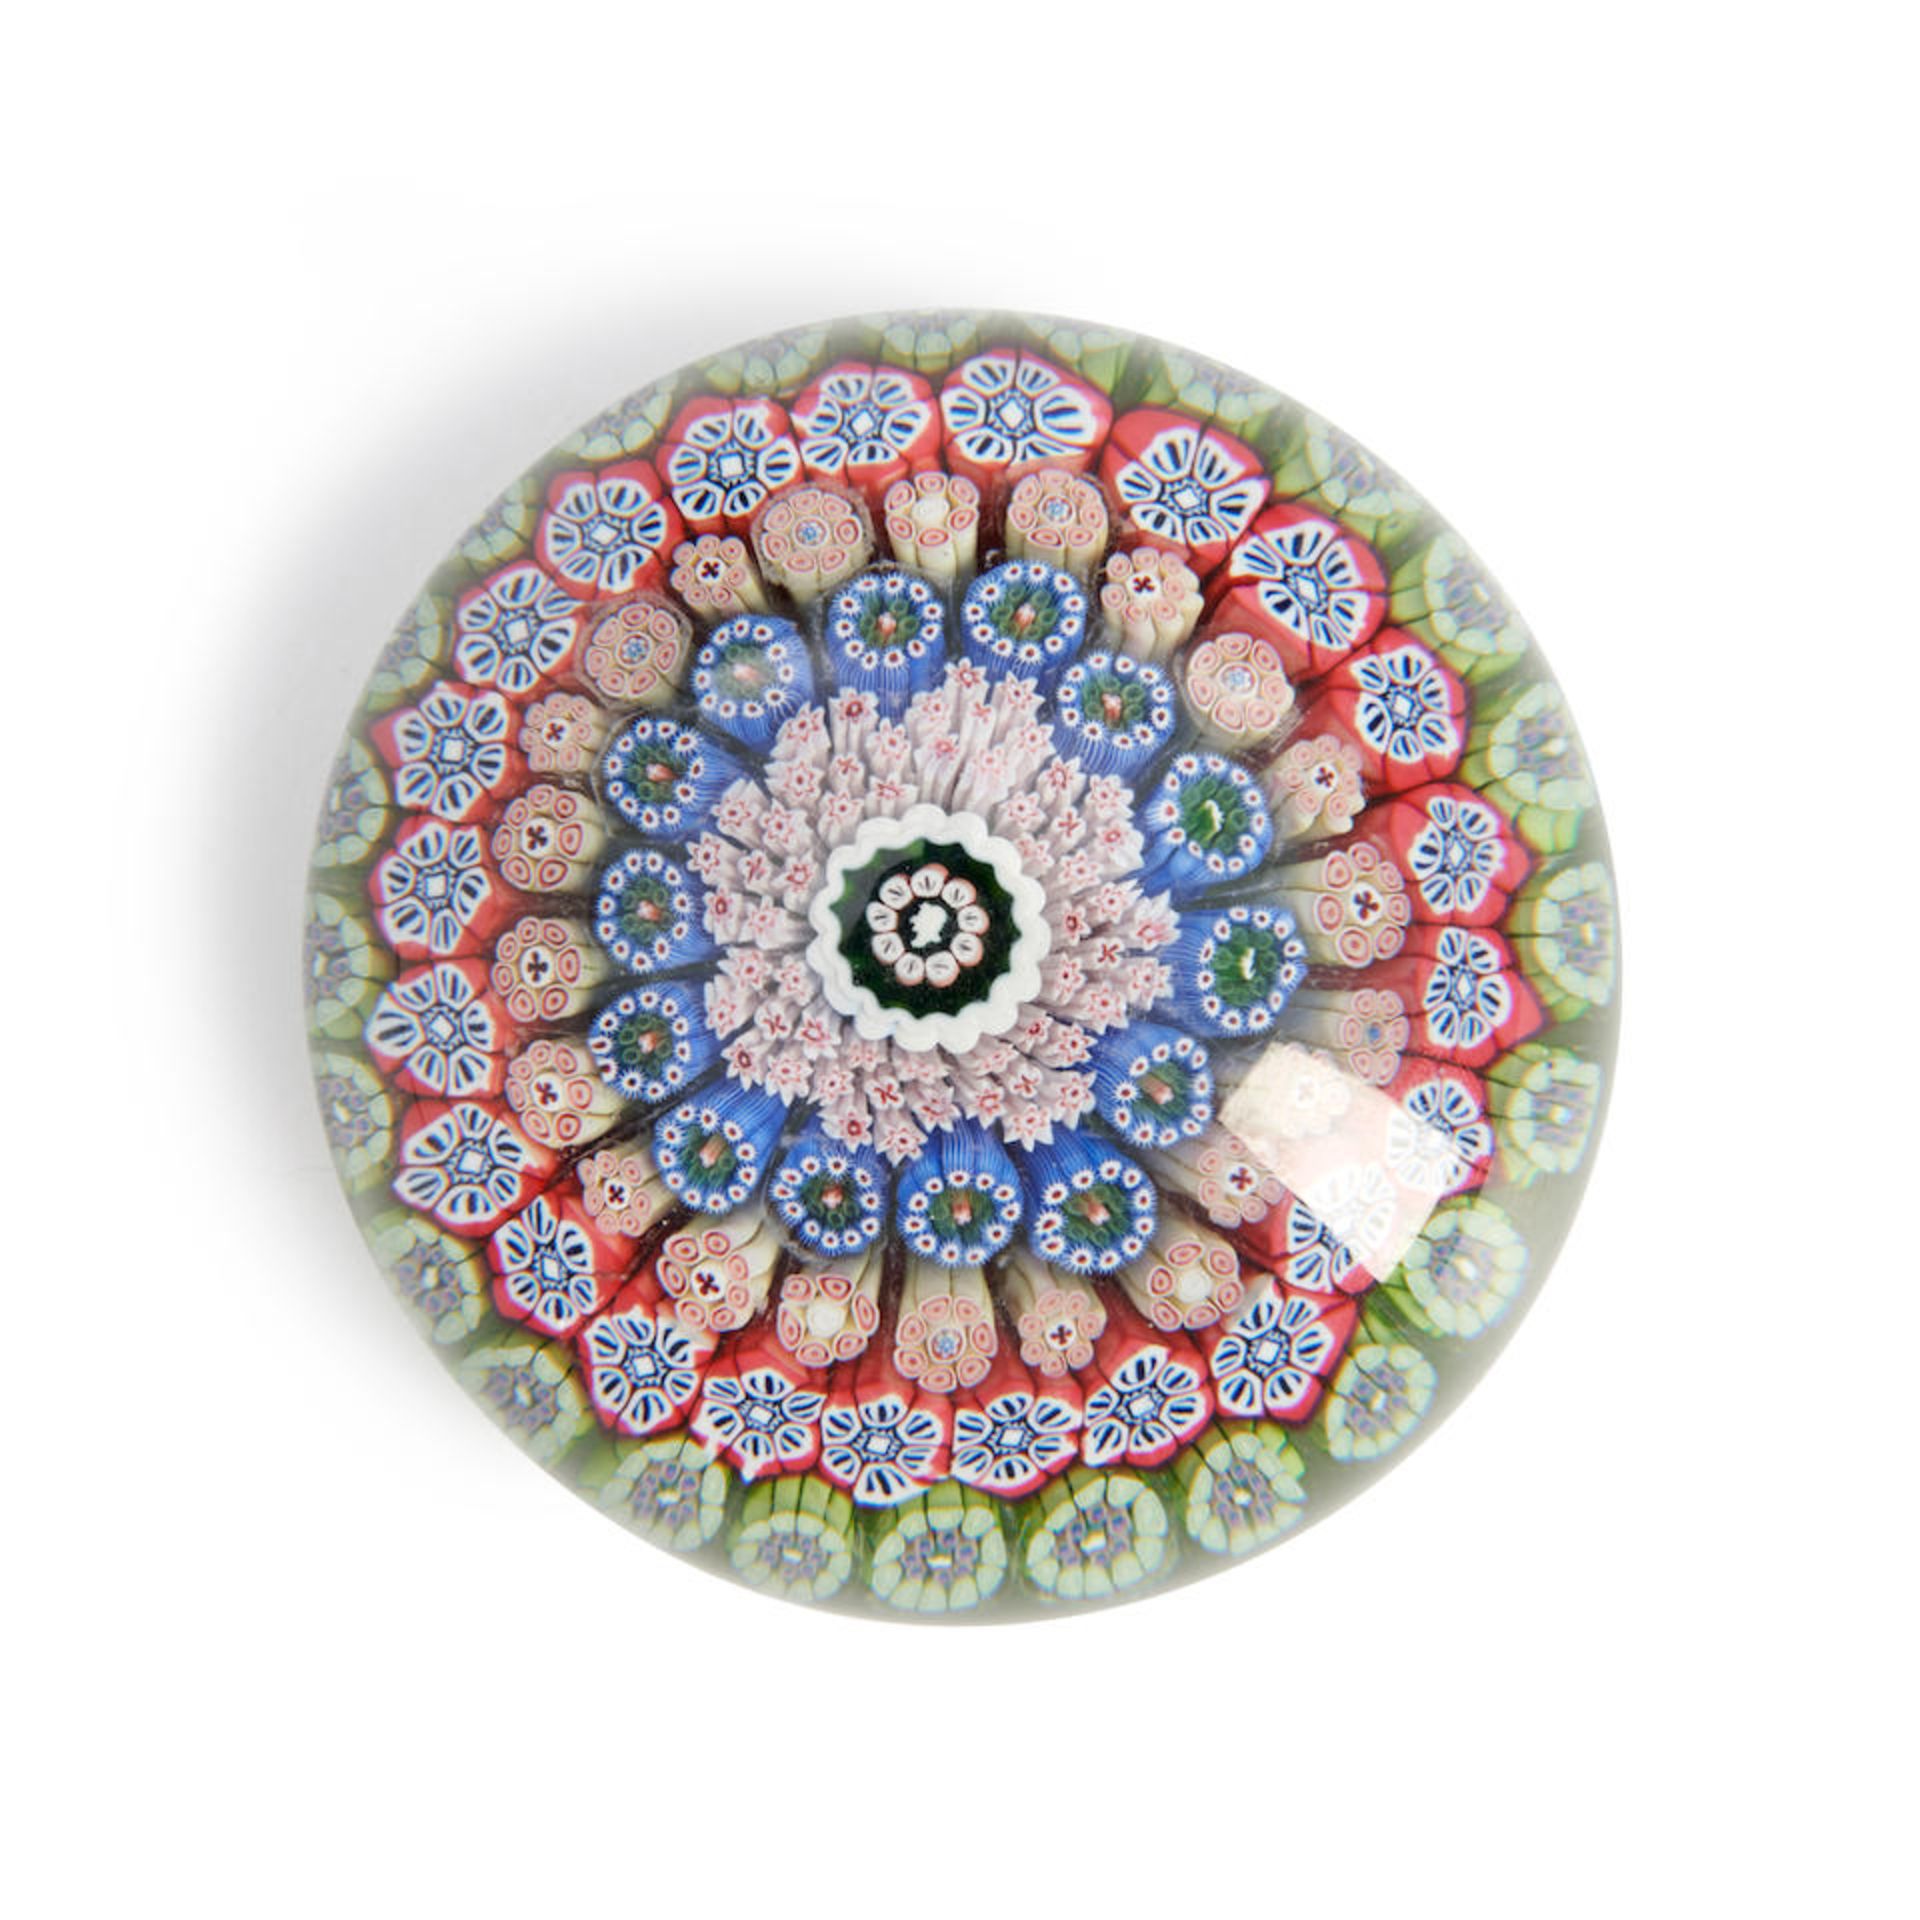 ST. LOUIS CONCENTRIC CIRCLES MILLEFIORI GLASS PAPERWEIGHT, France, ht. 1 3/4, dia. 3 in.